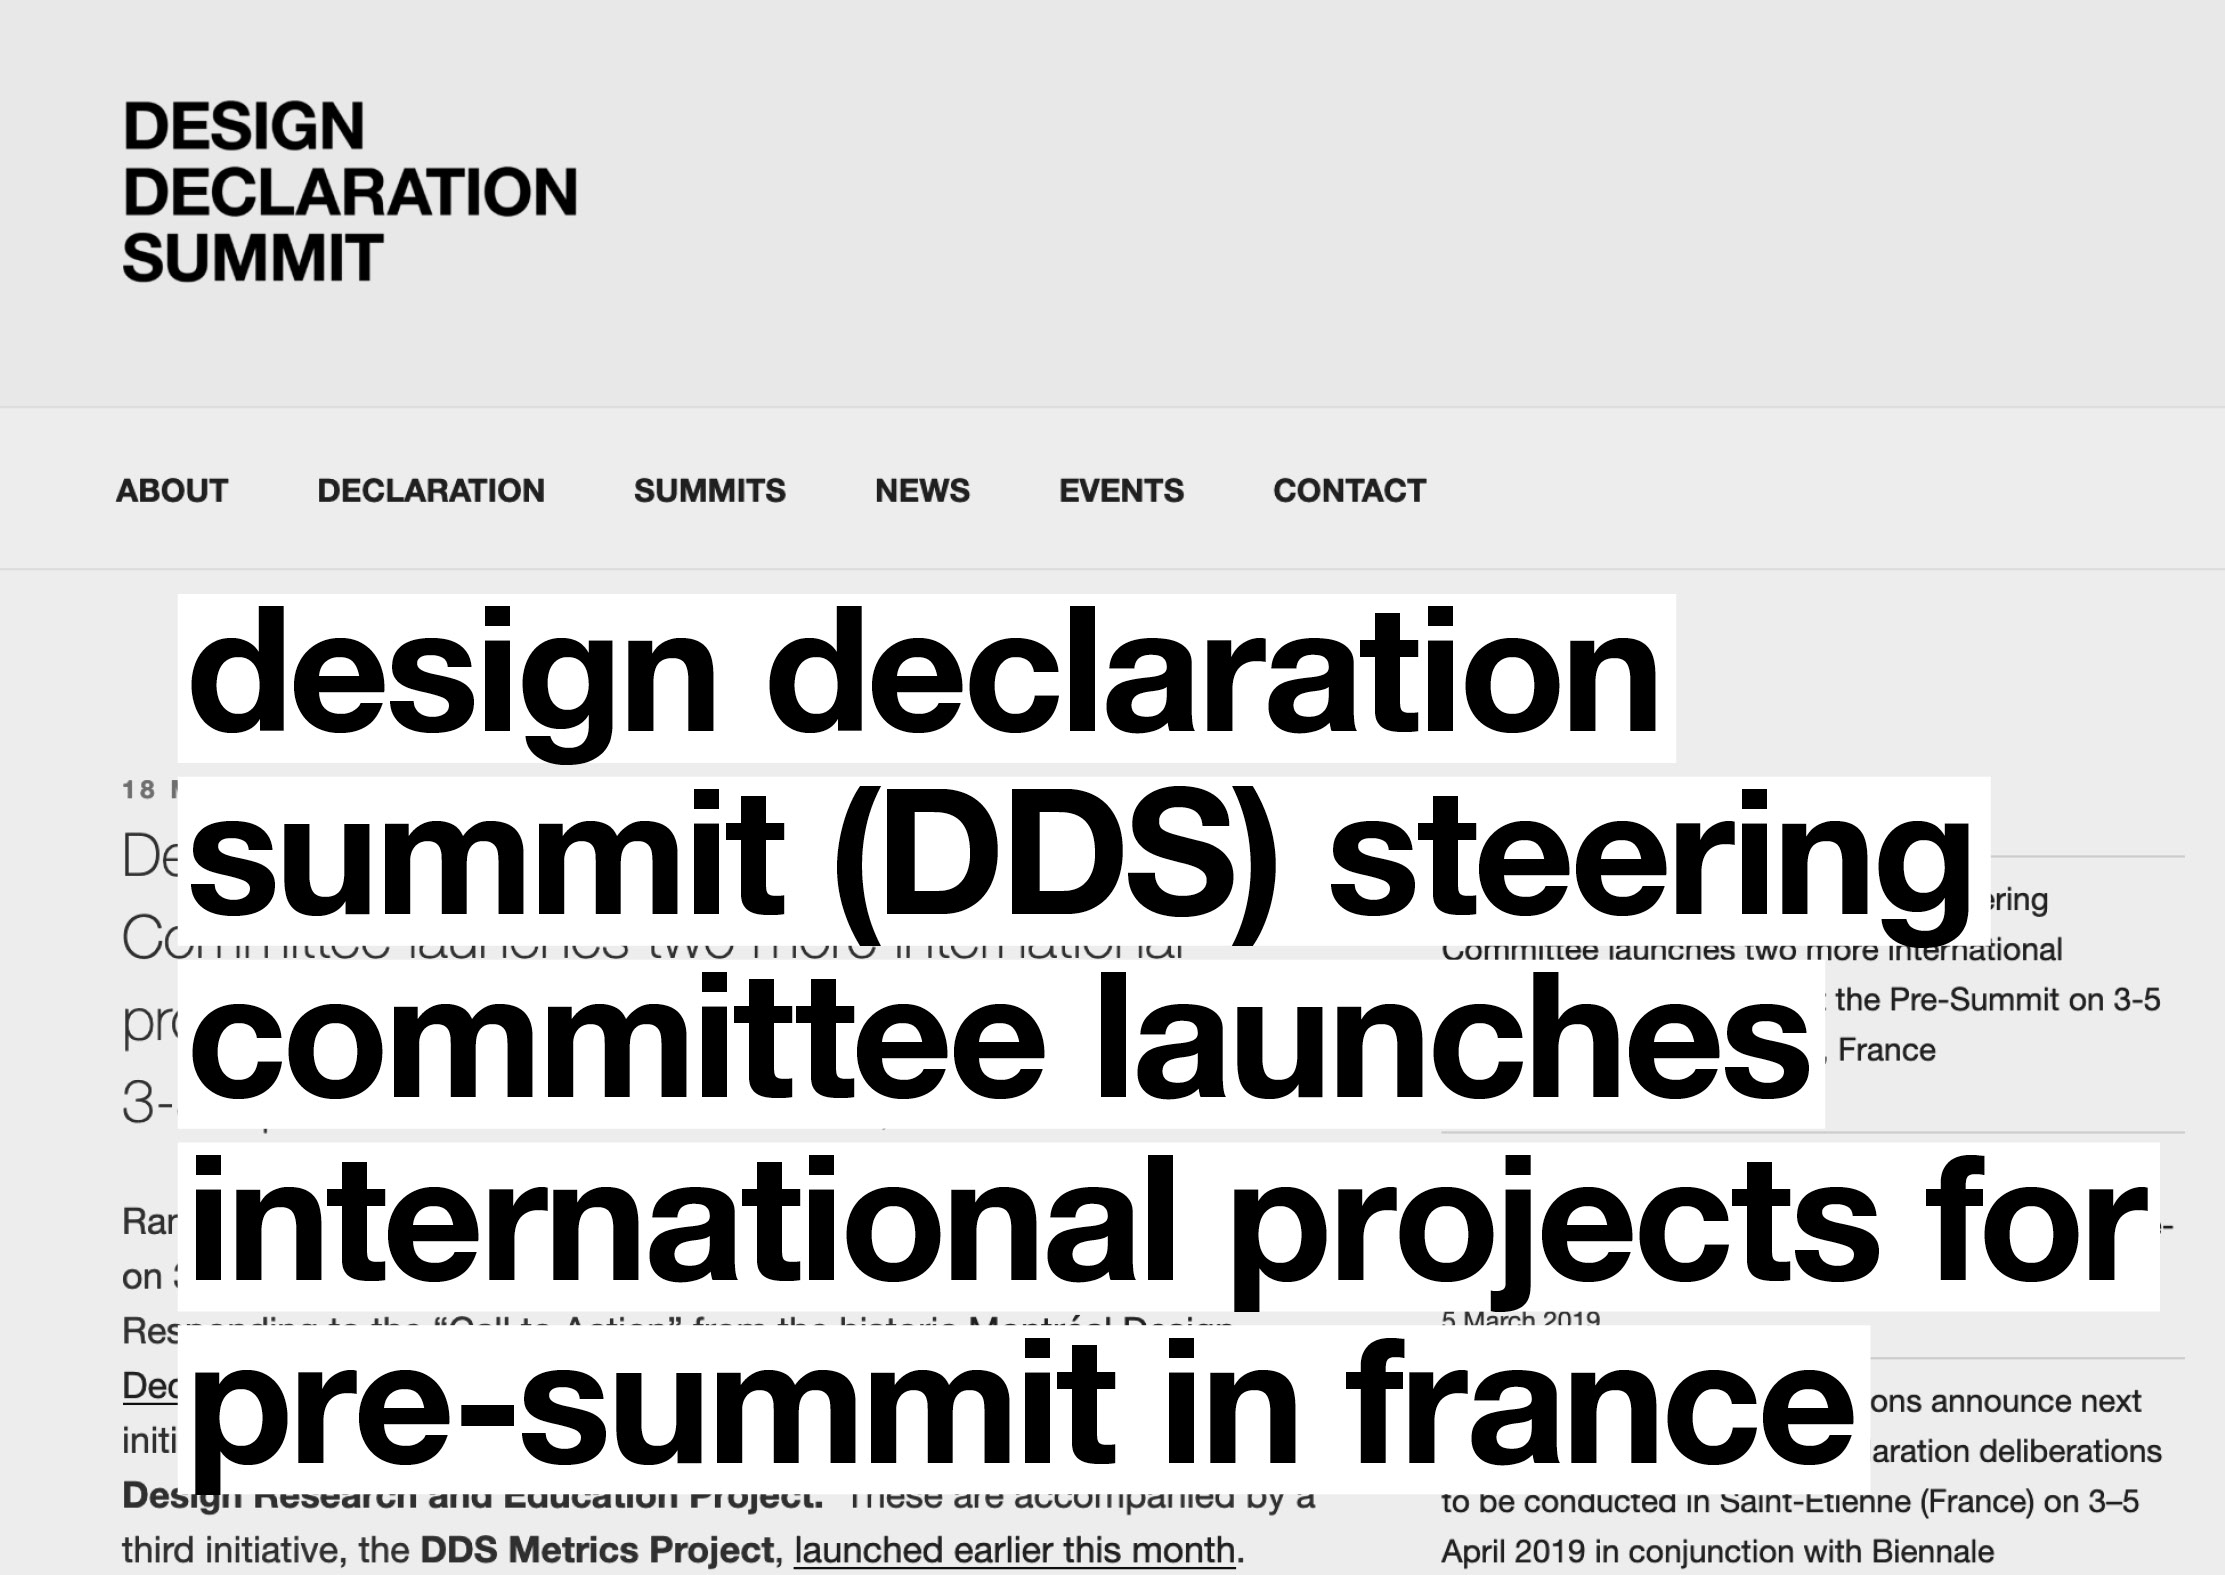 Design Declaration Summit (DDS) Steering Committee launches two more international projects for Pre-Summit in France